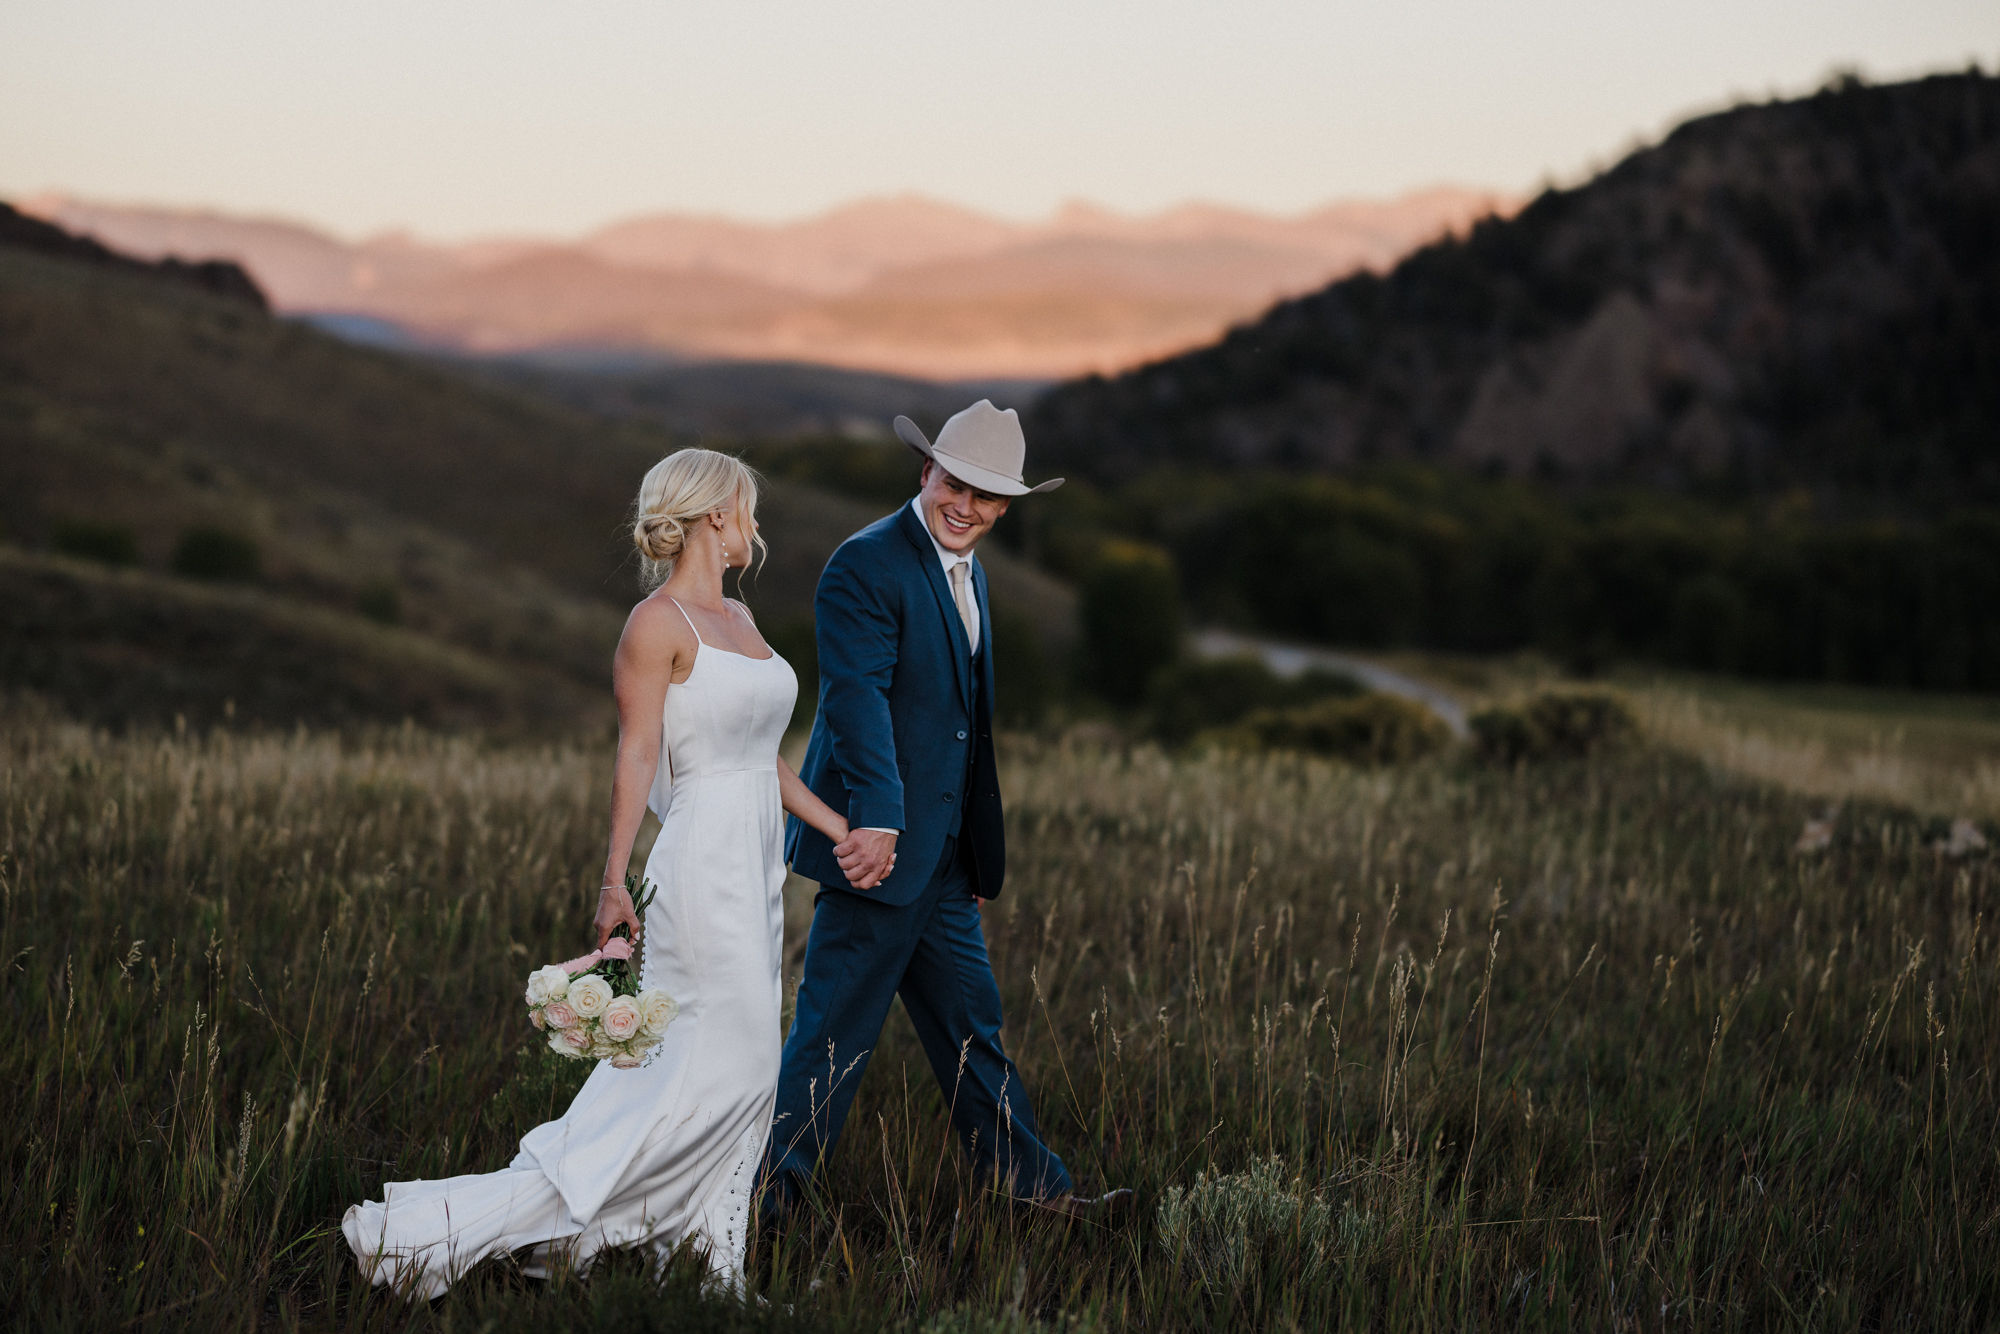 after narrowing wedding guest list, bride and groom take photos during micro wedding in colorado